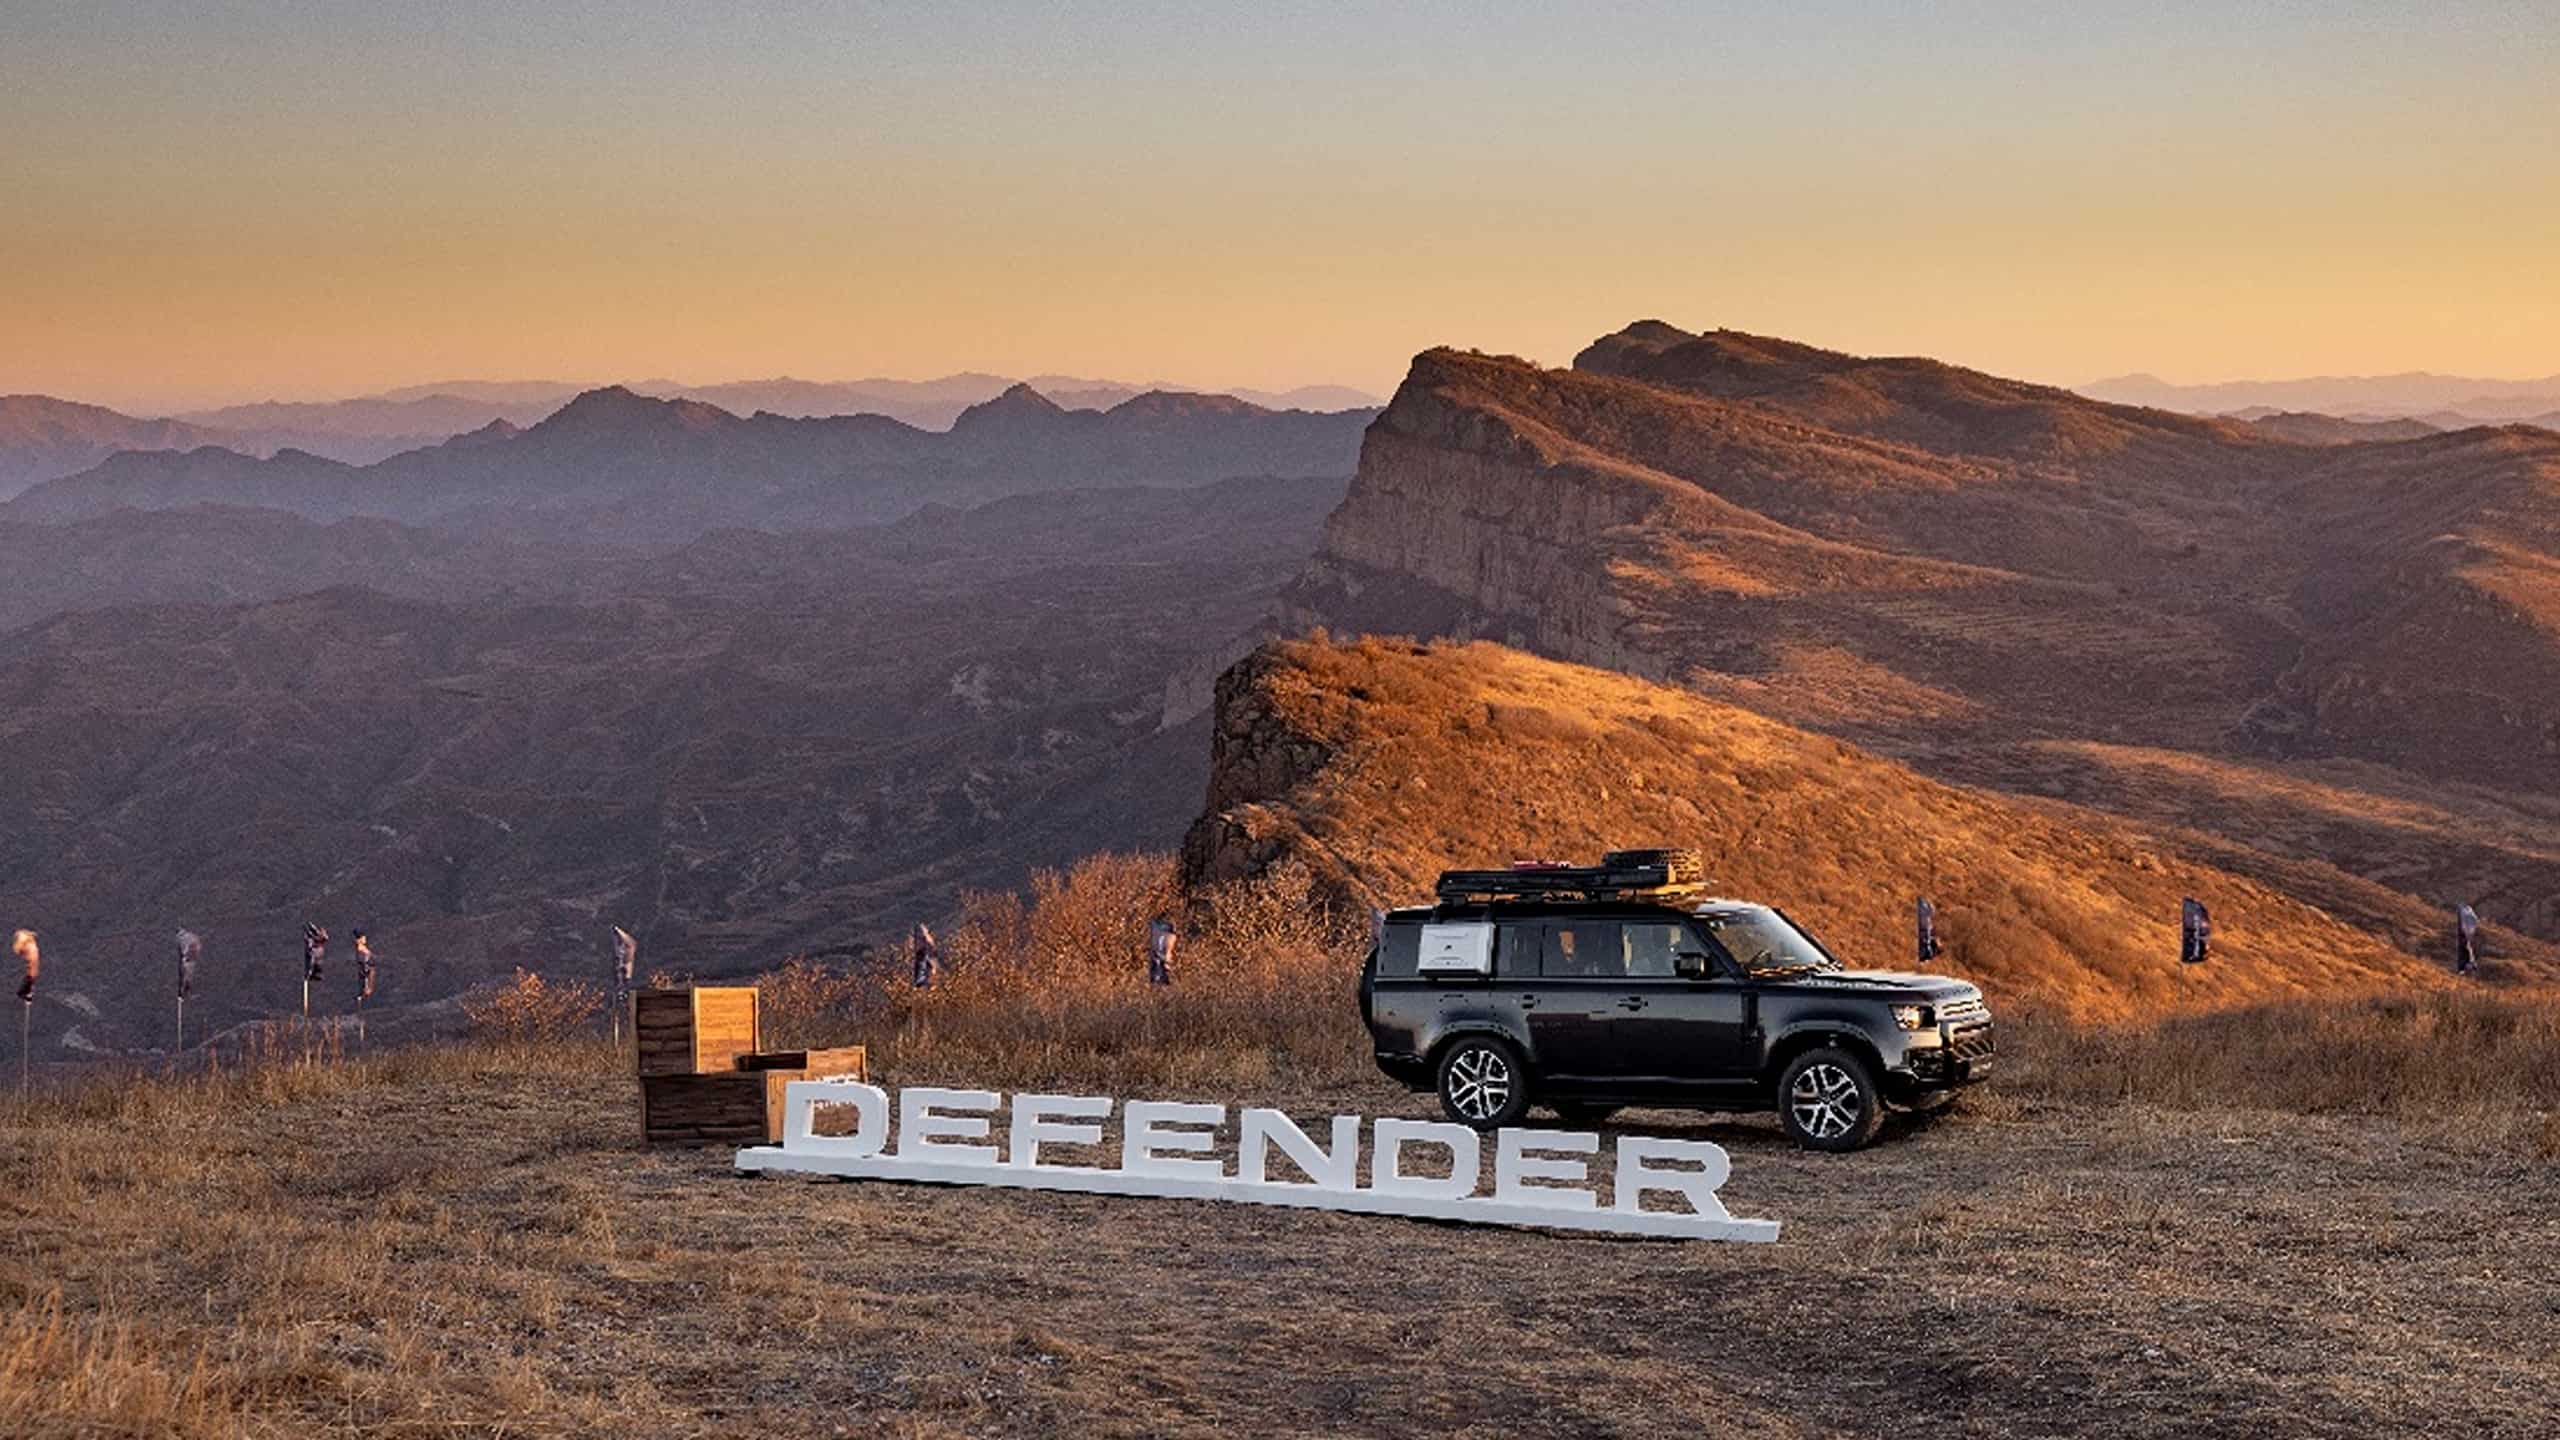  new Land Rover Defender 130 challenge heavy off-road